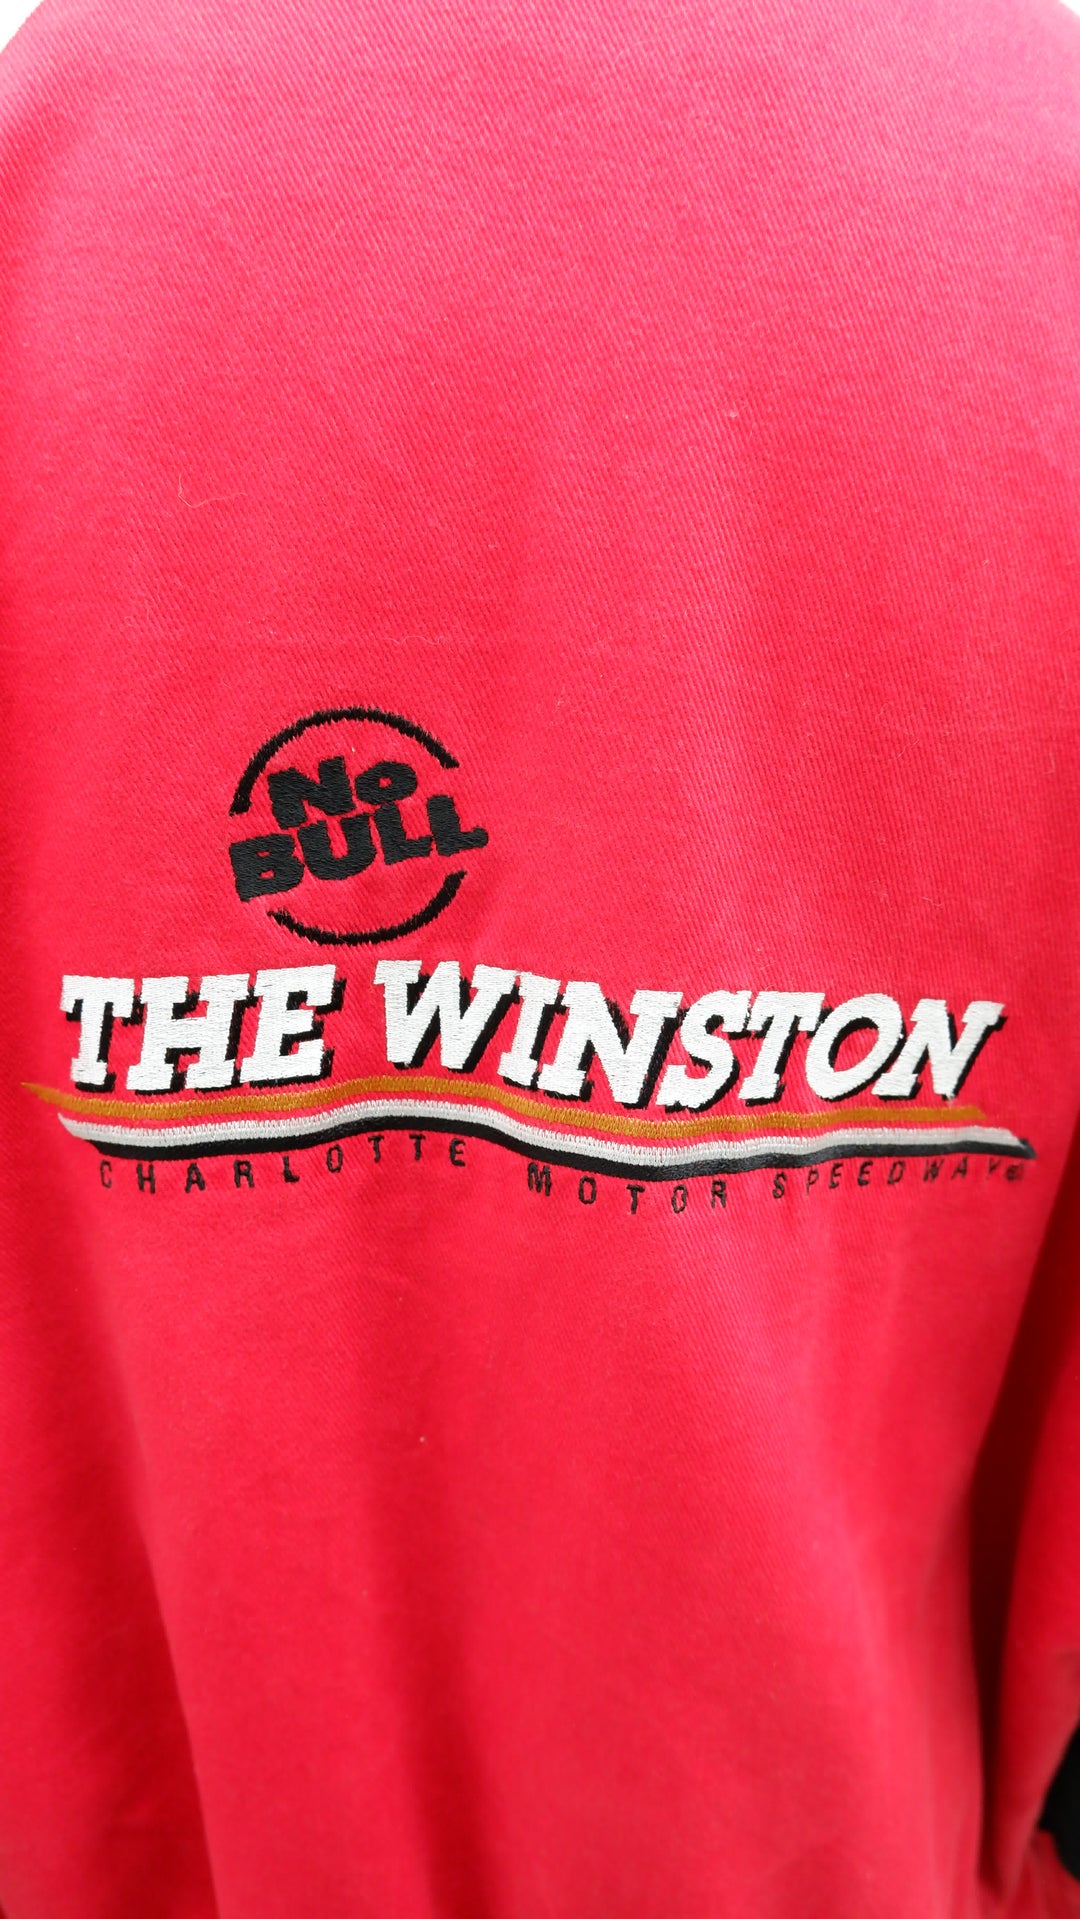 Vintage Bull The Winston Charlotte Motor Speedway Racing Jacket Made In USA